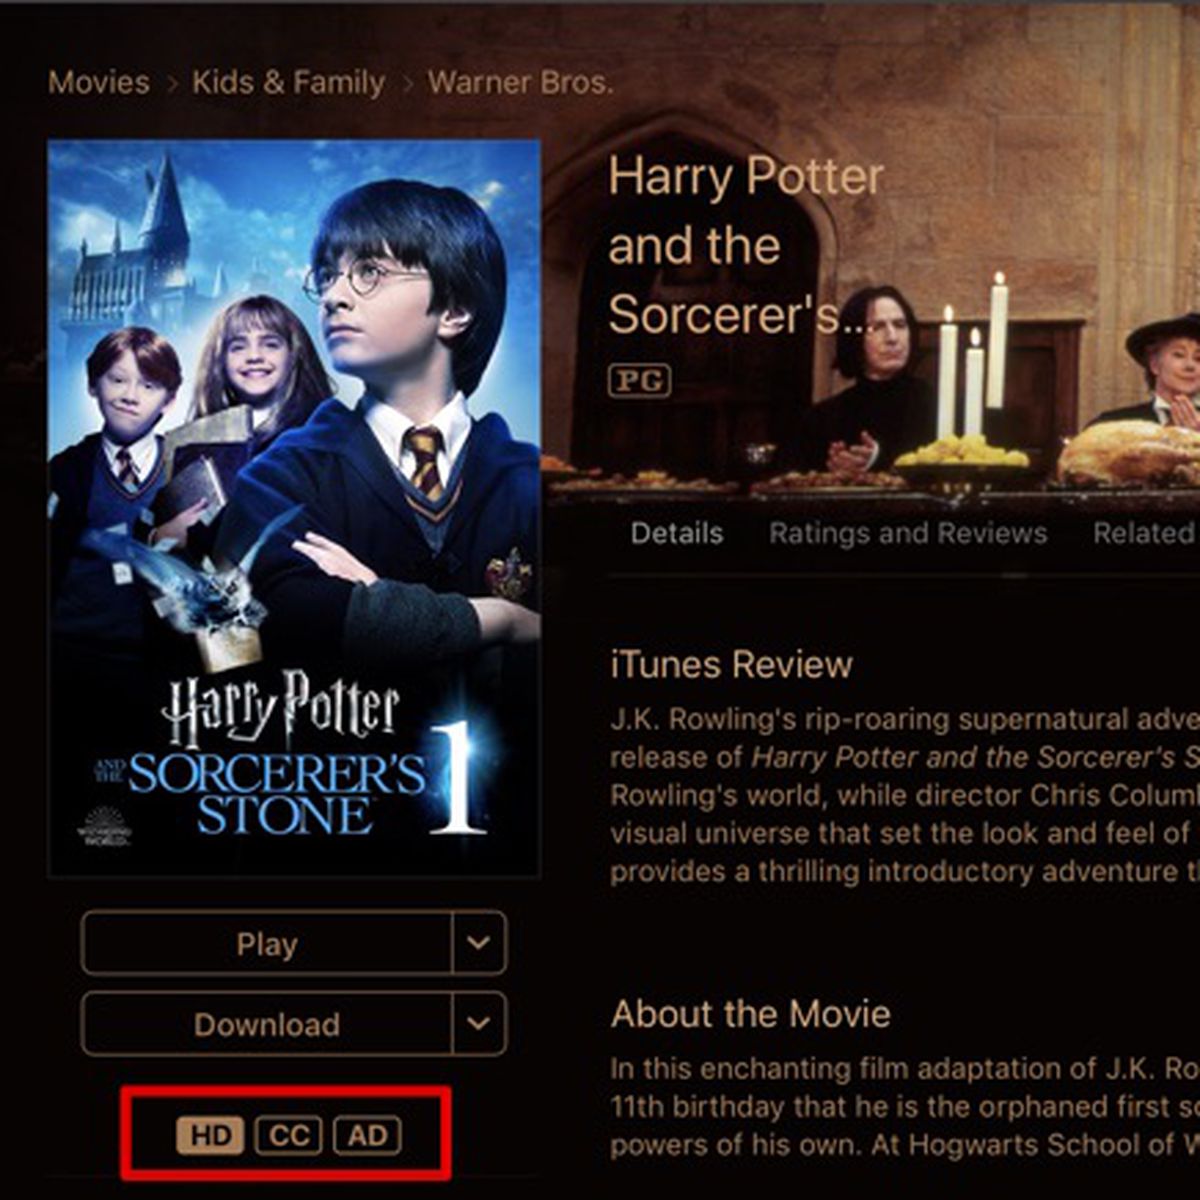 Harry Potter Stream 4k Many Warner Bros Movies Have Reverted to HD Instead of 4K on iTunes and in  User Movie Libraries [Update] - MacRumors